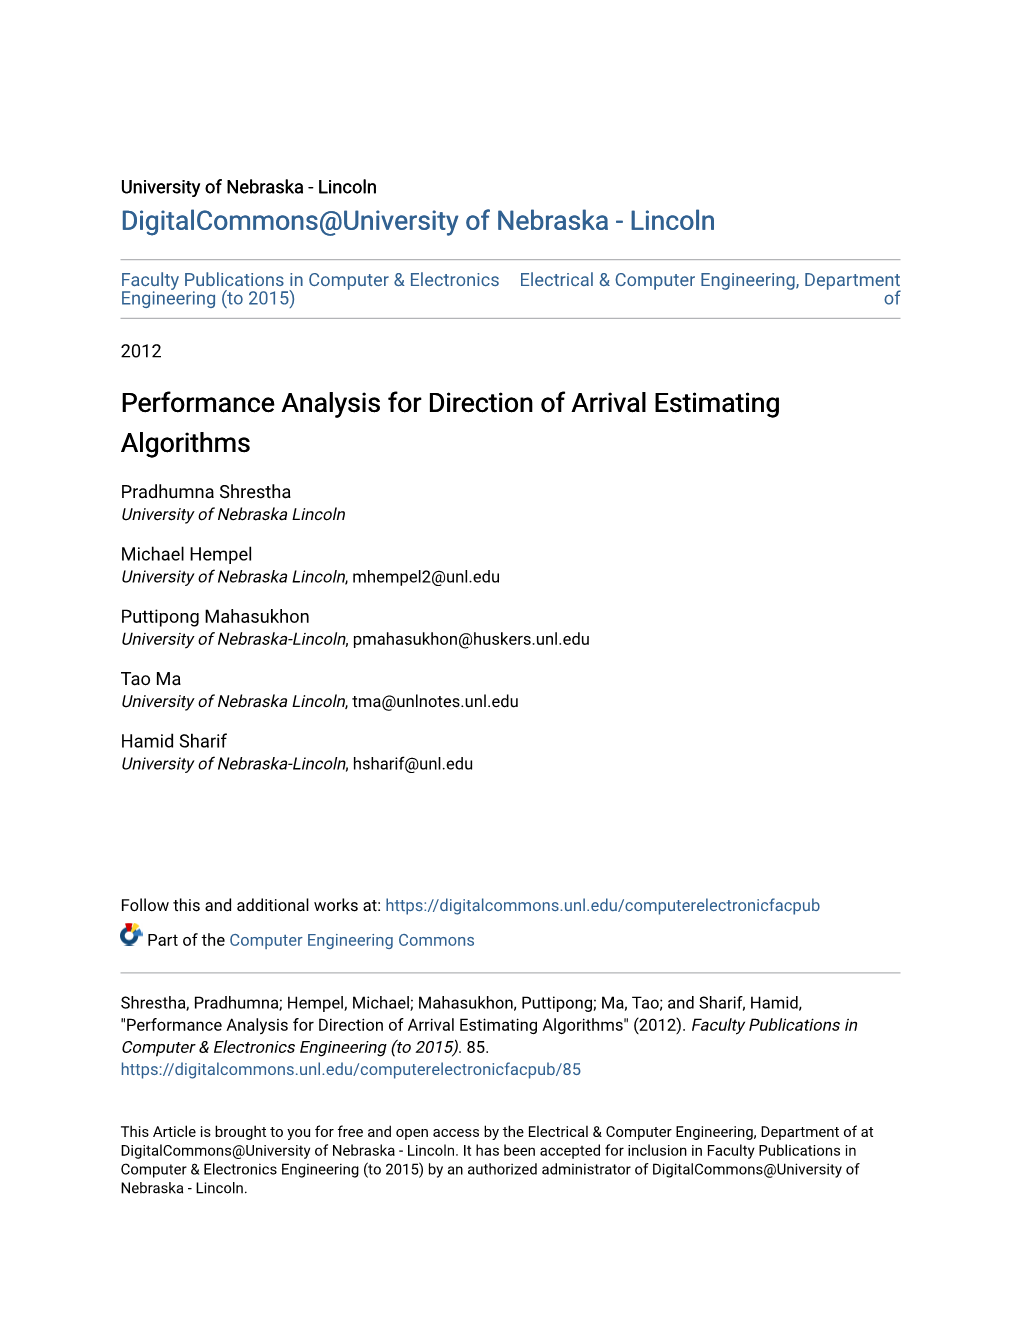 Performance Analysis for Direction of Arrival Estimating Algorithms